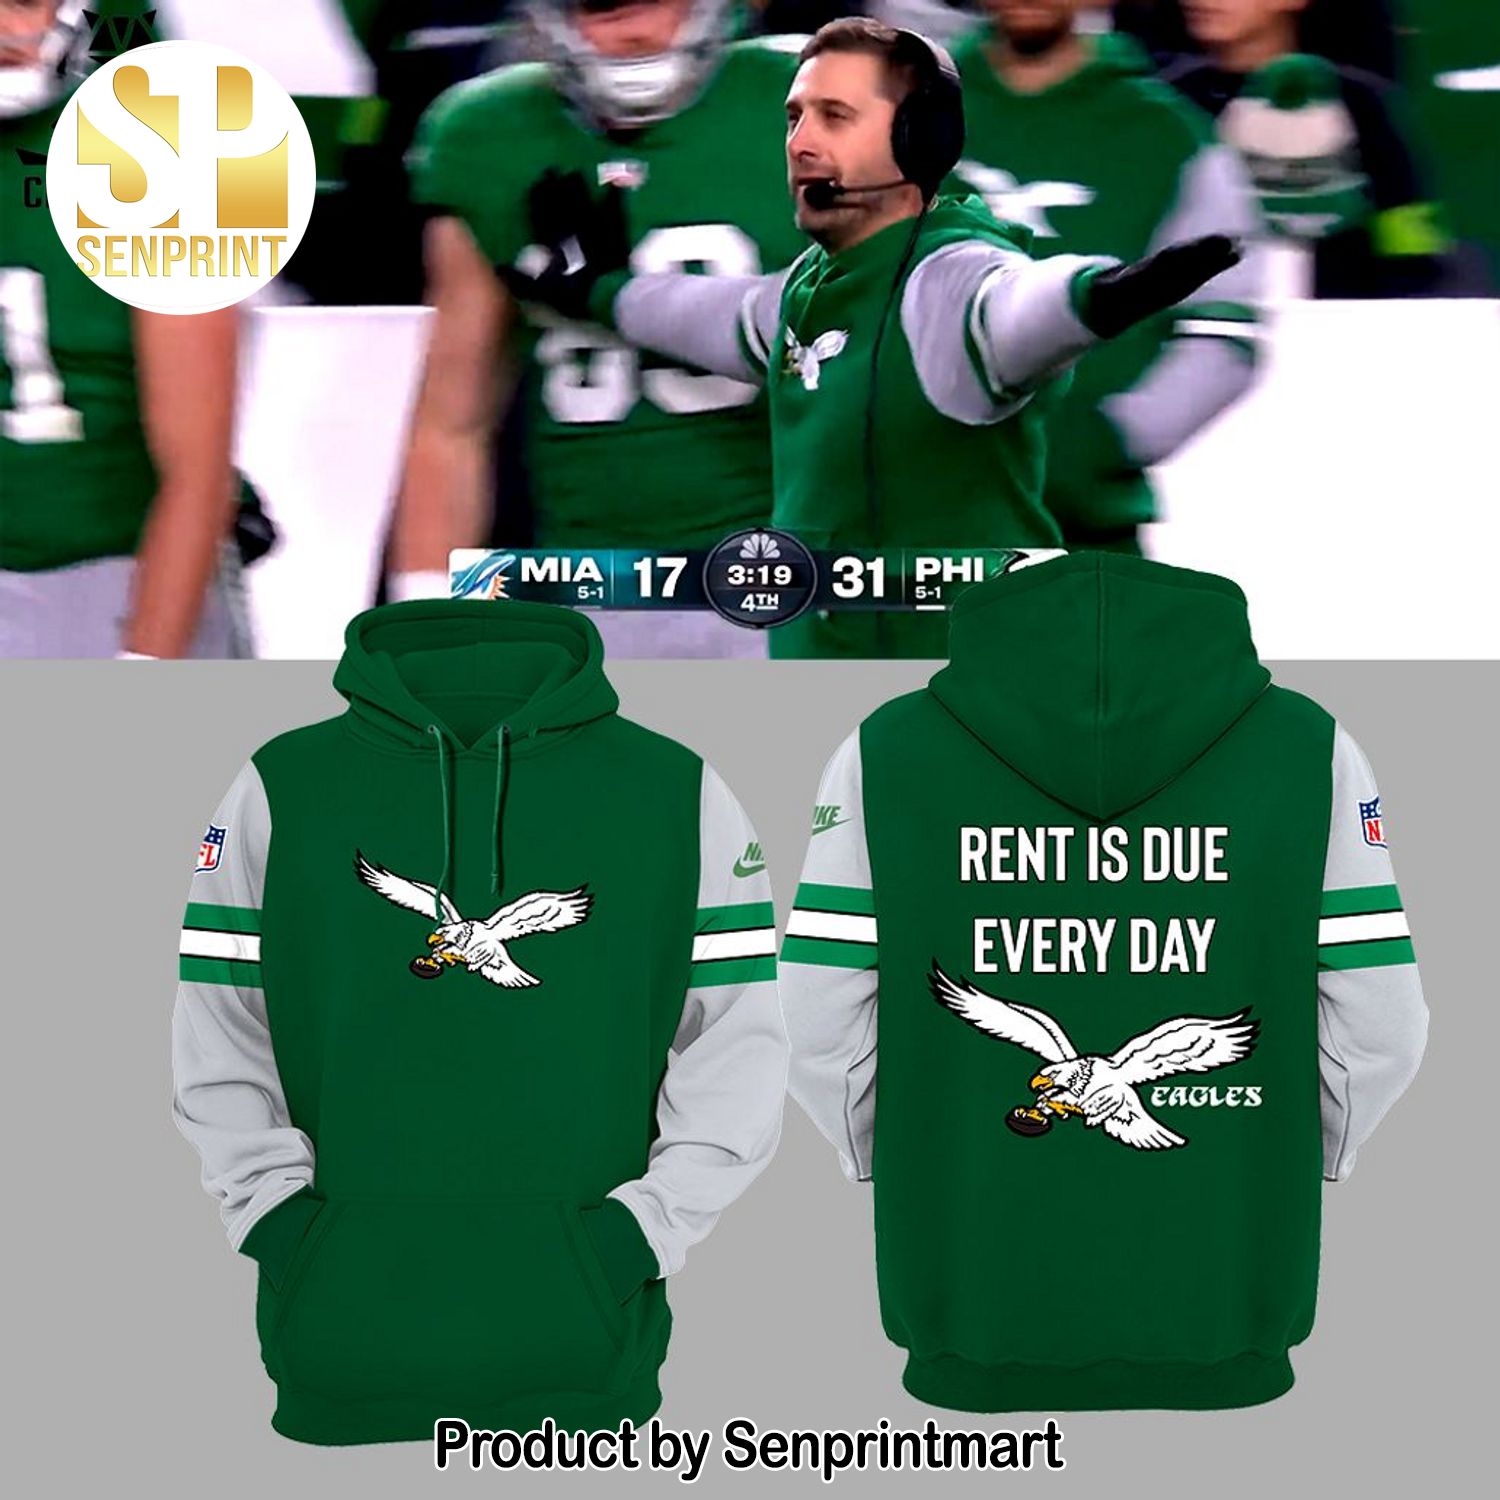 Philadelphia Eagles Rent Is Due Every Day NFL Design On Sleeve Full Printing Shirt